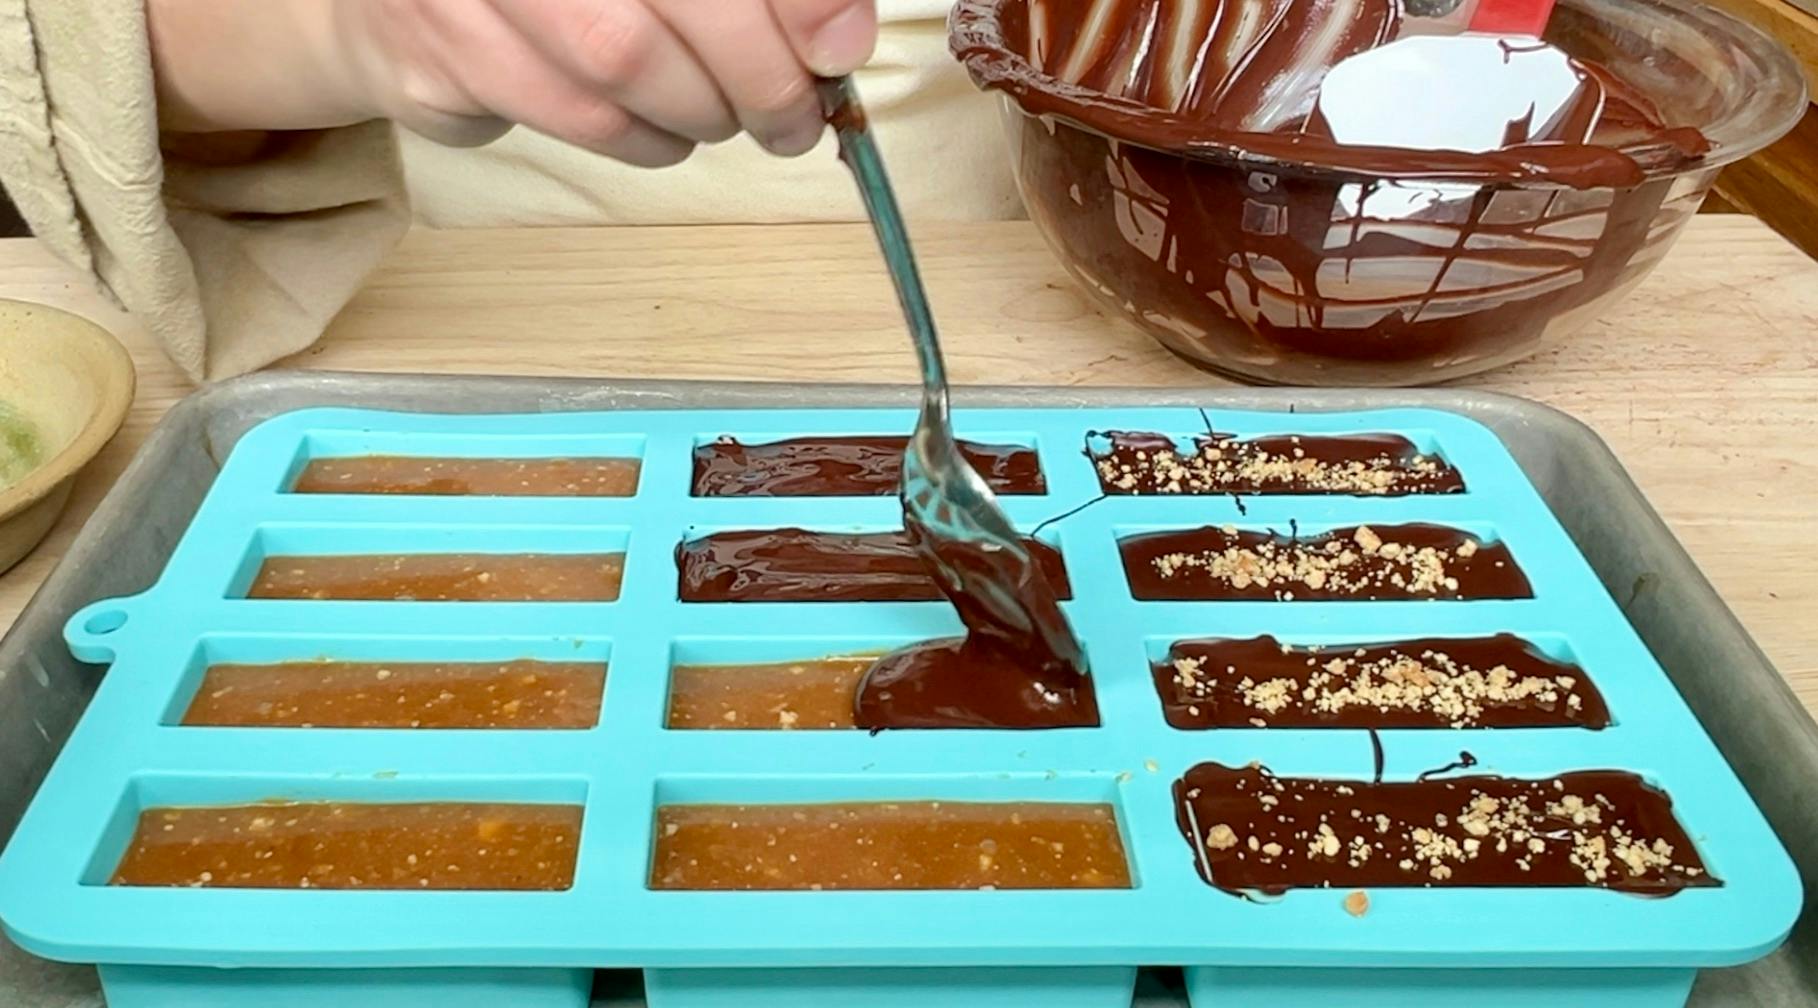 Spooning chocolate into the molds.